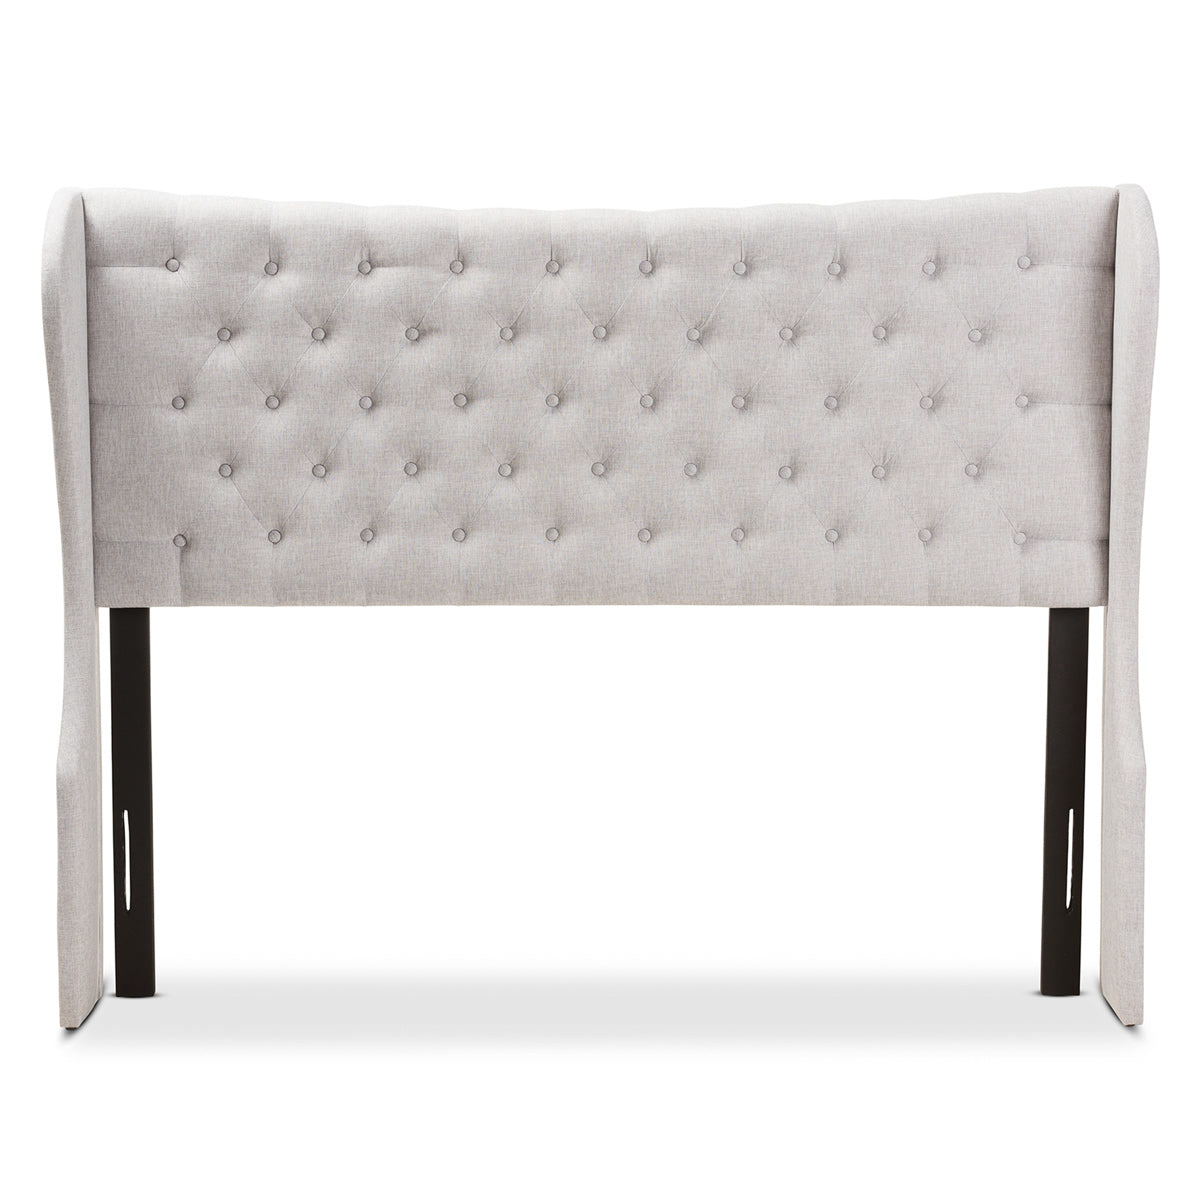 Baxton Studio Cadence Modern and Contemporary Greyish Beige Fabric Button-Tufted Queen Size Winged Headboard Baxton Studio-Headboards-Minimal And Modern - 2